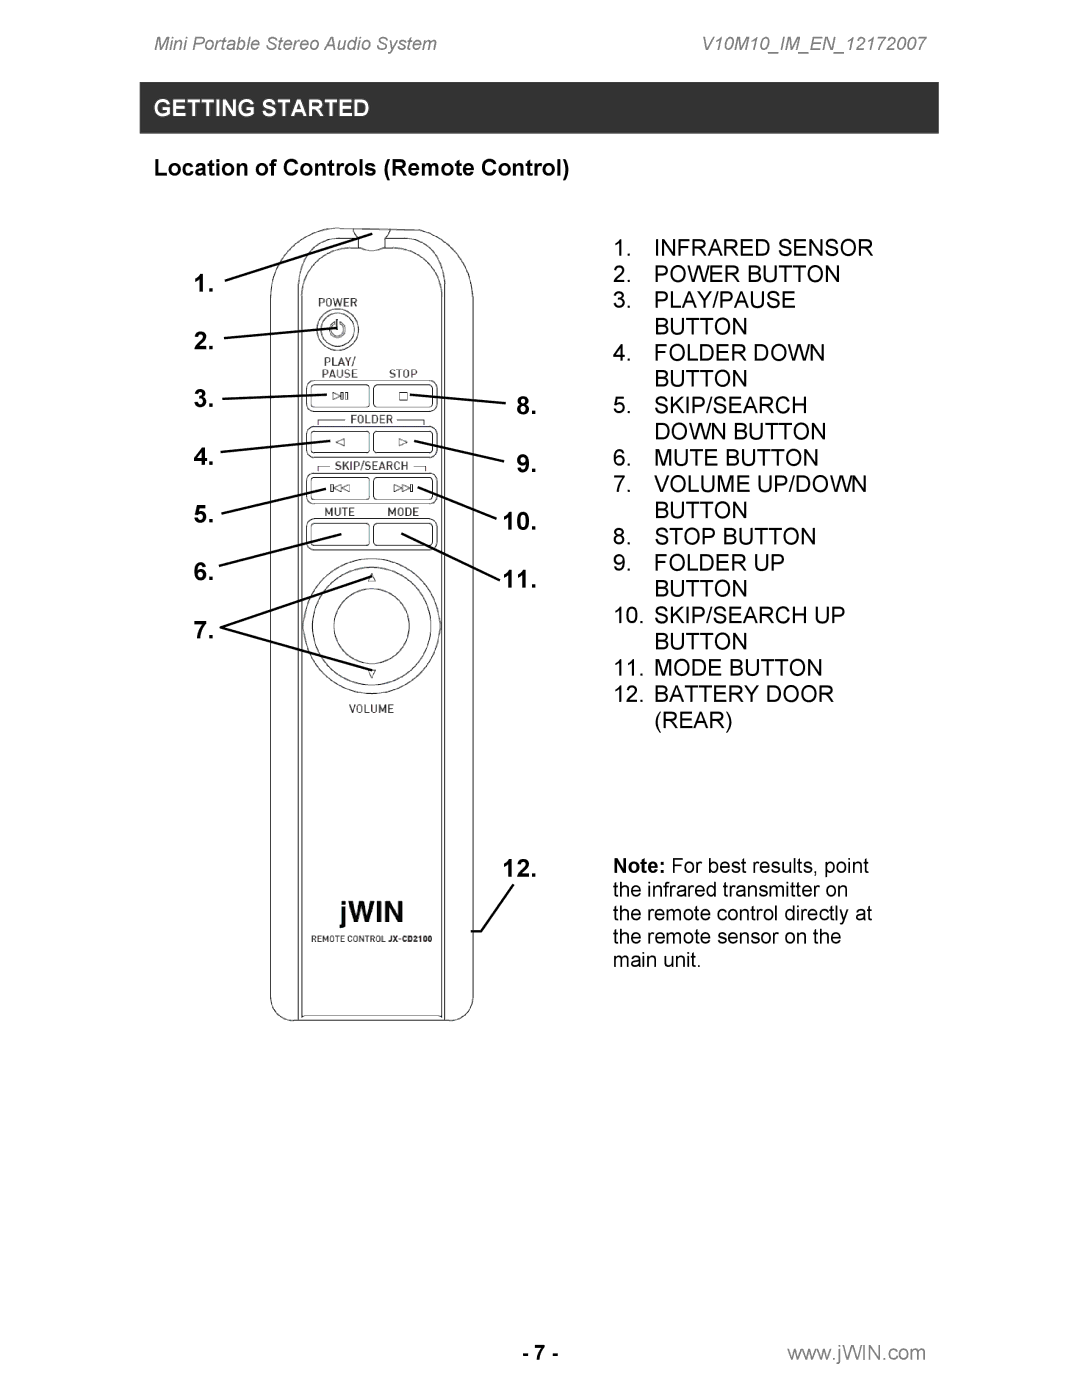 Jwin JX-CD2100 instruction manual Location of Controls Remote Control 